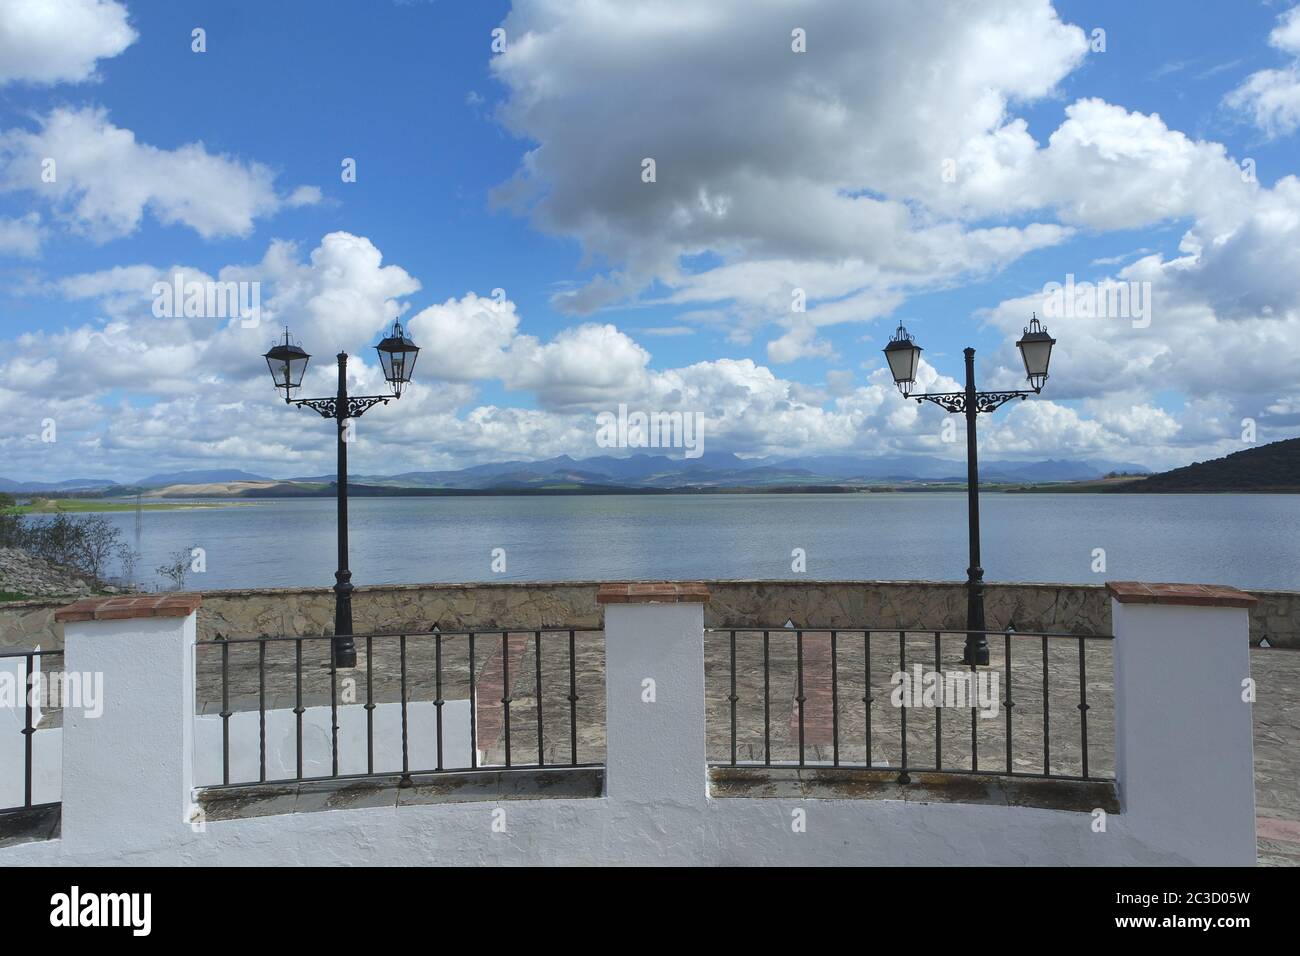 Terrasse am See. Bornos, Andalusien Stockfoto